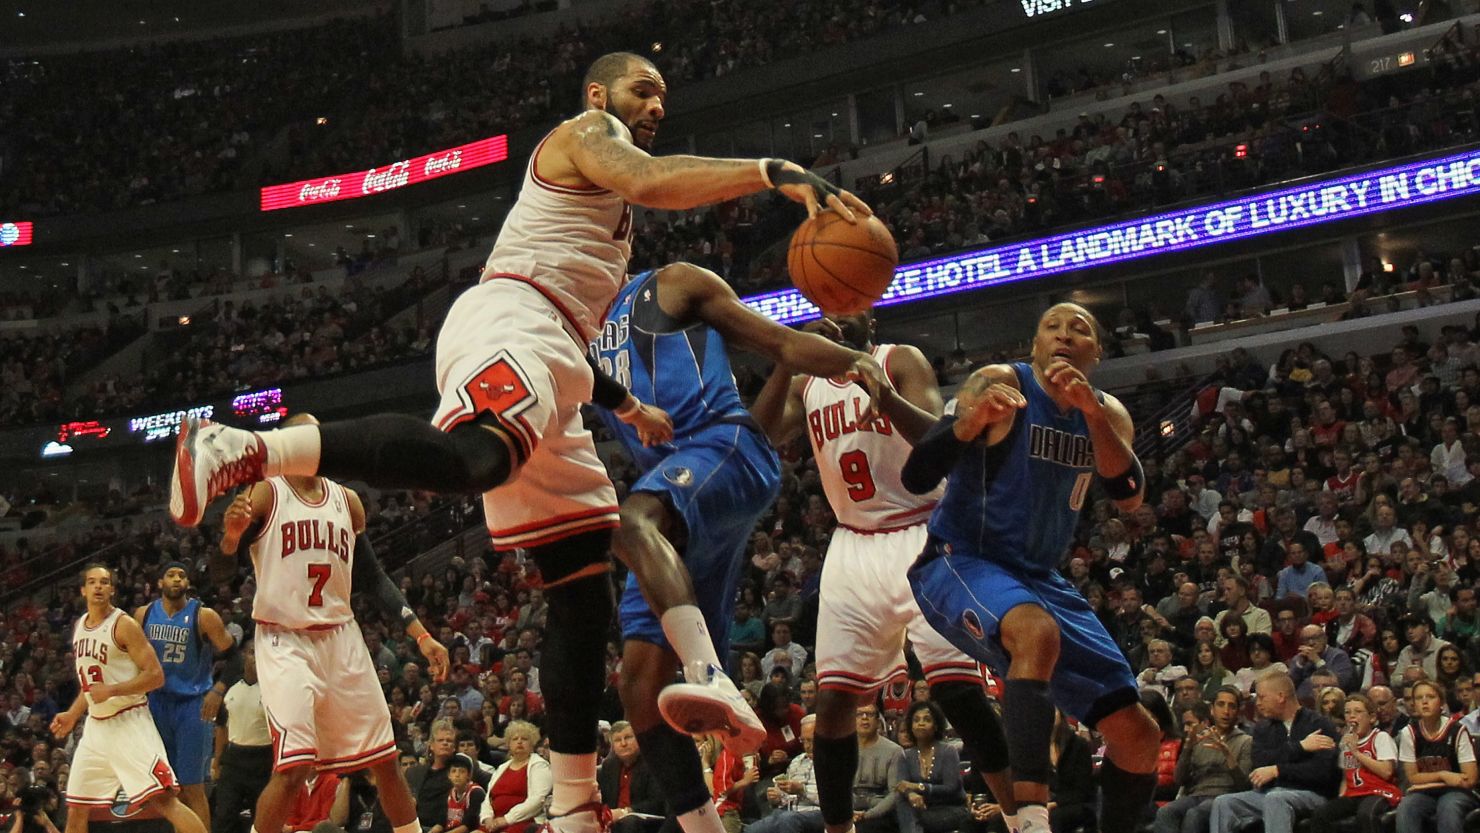 One day we could see players such as those in this recent Chicago Bulls-Dallas Mavericks game wearing ads on their jerseys.